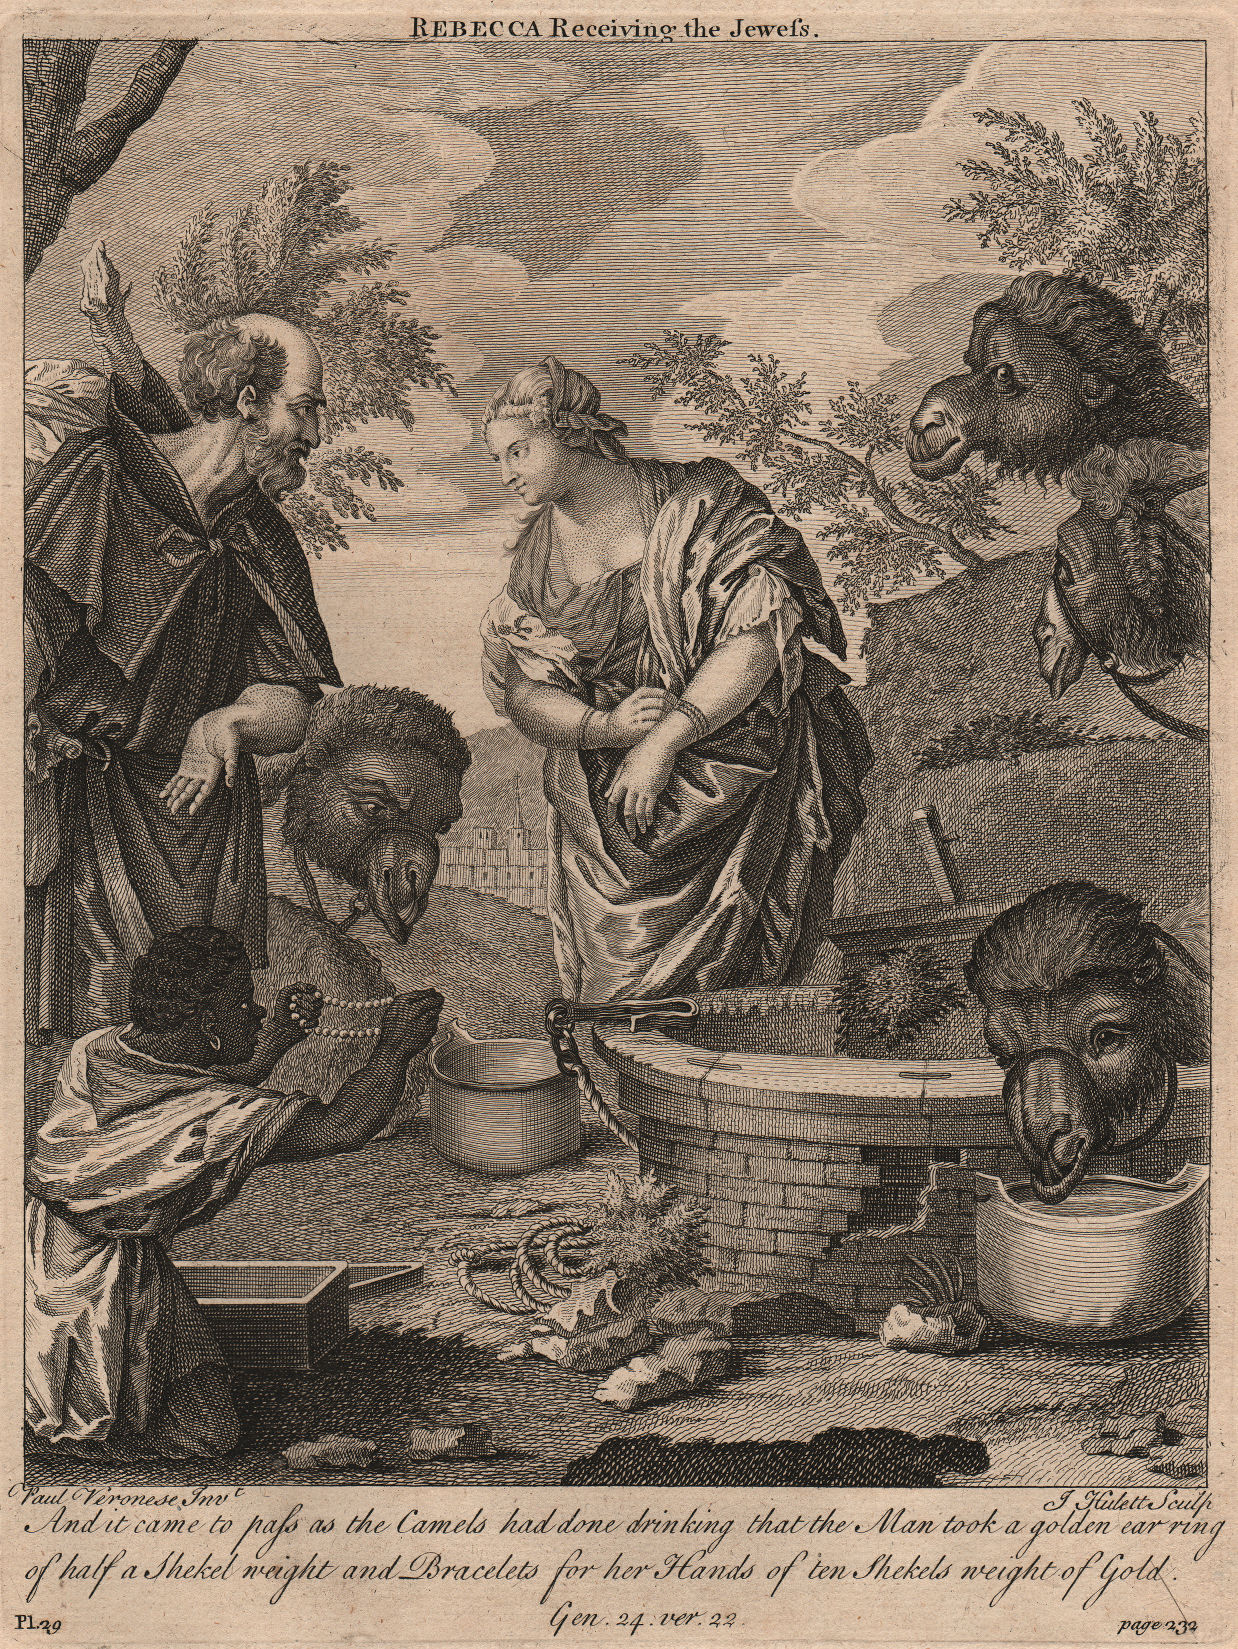 Associate Product BIBLE. Genesis 14.22 Rebecca receiving the Jewess 1752 old antique print